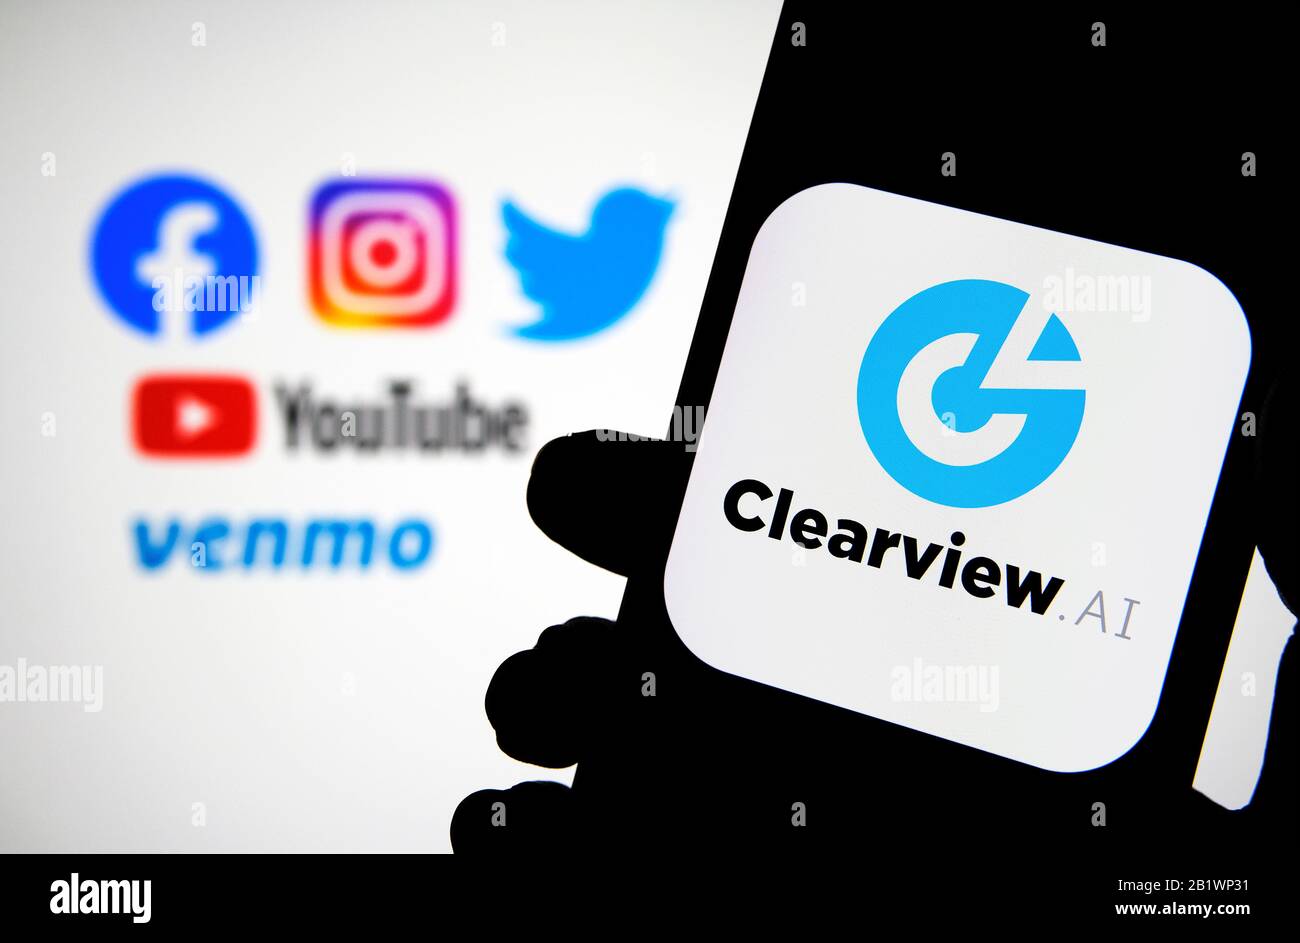 Clearview AI company logo on the smartphone hold in hands with blurred social media where the data collected. Concept for face recognition software. Stock Photo